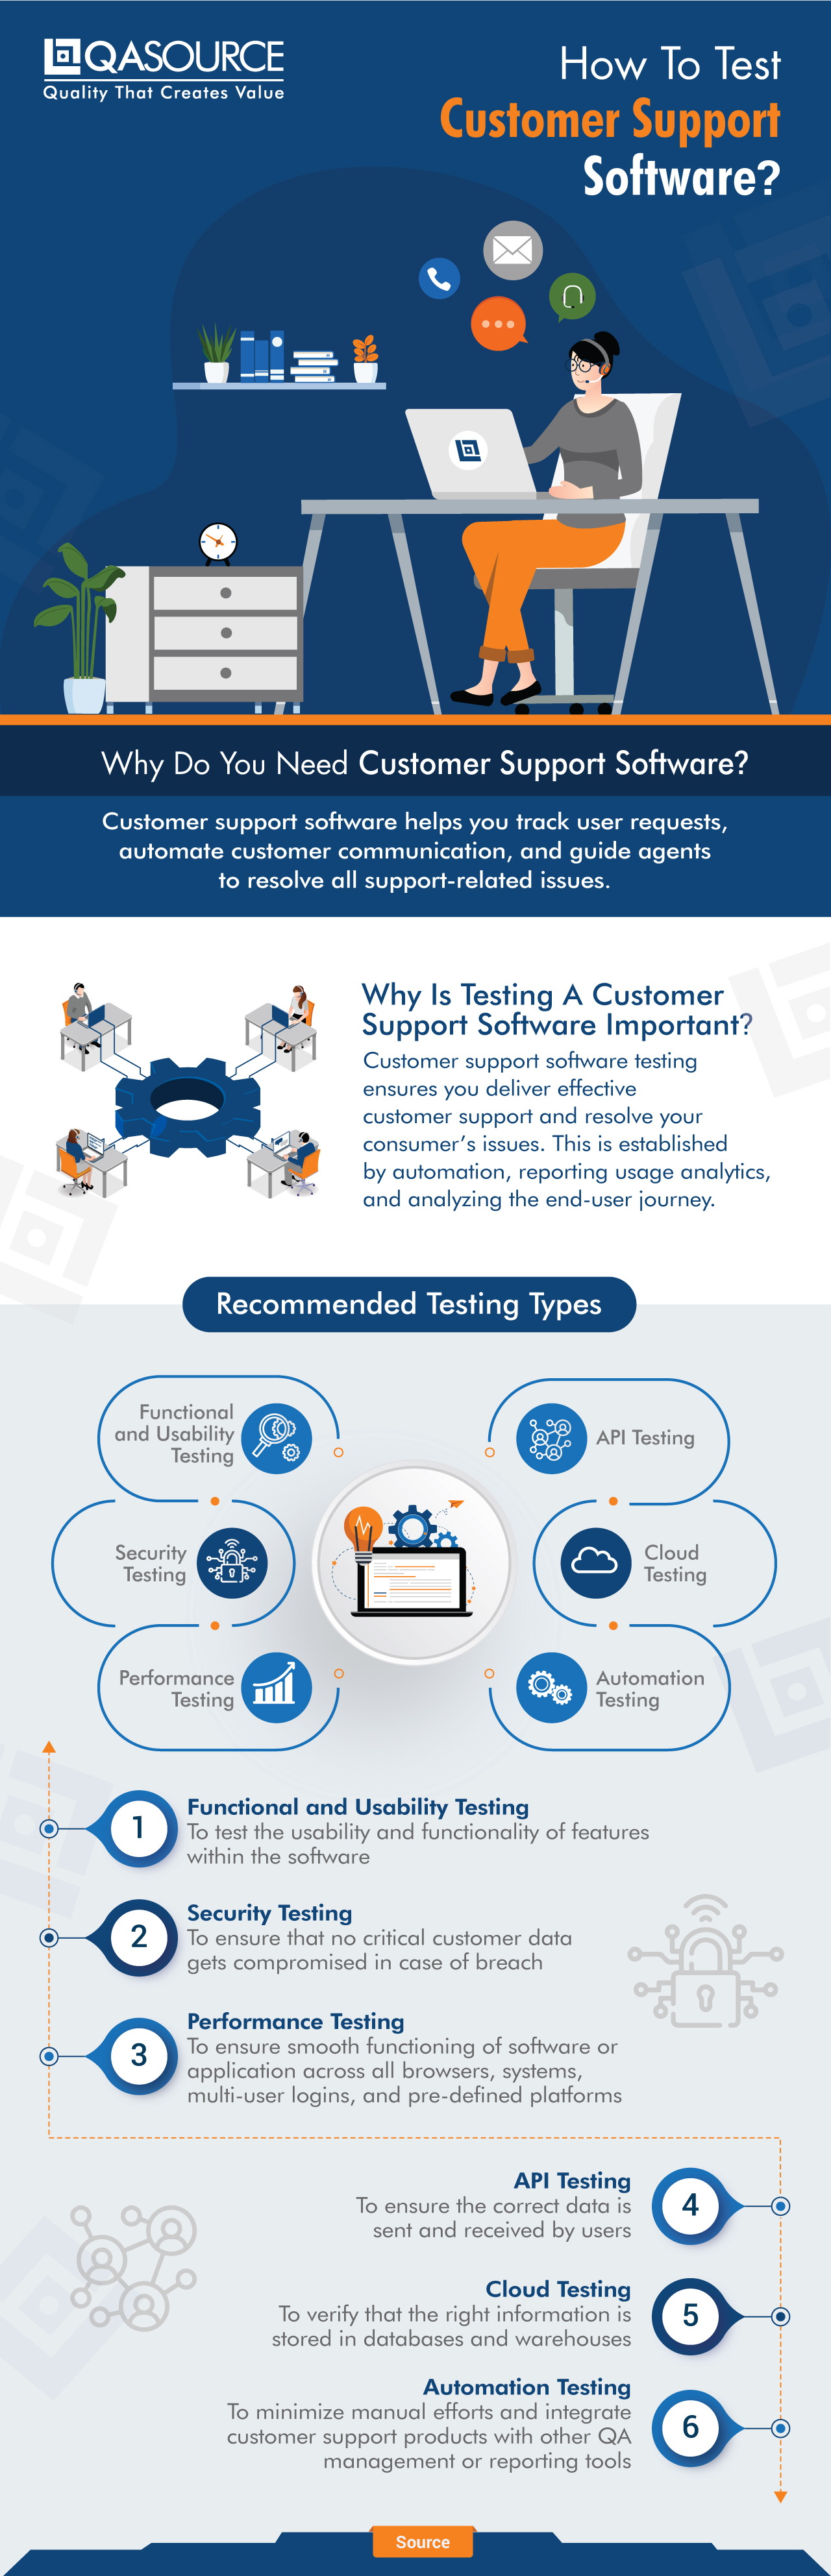 How To Test Customer Support Software?